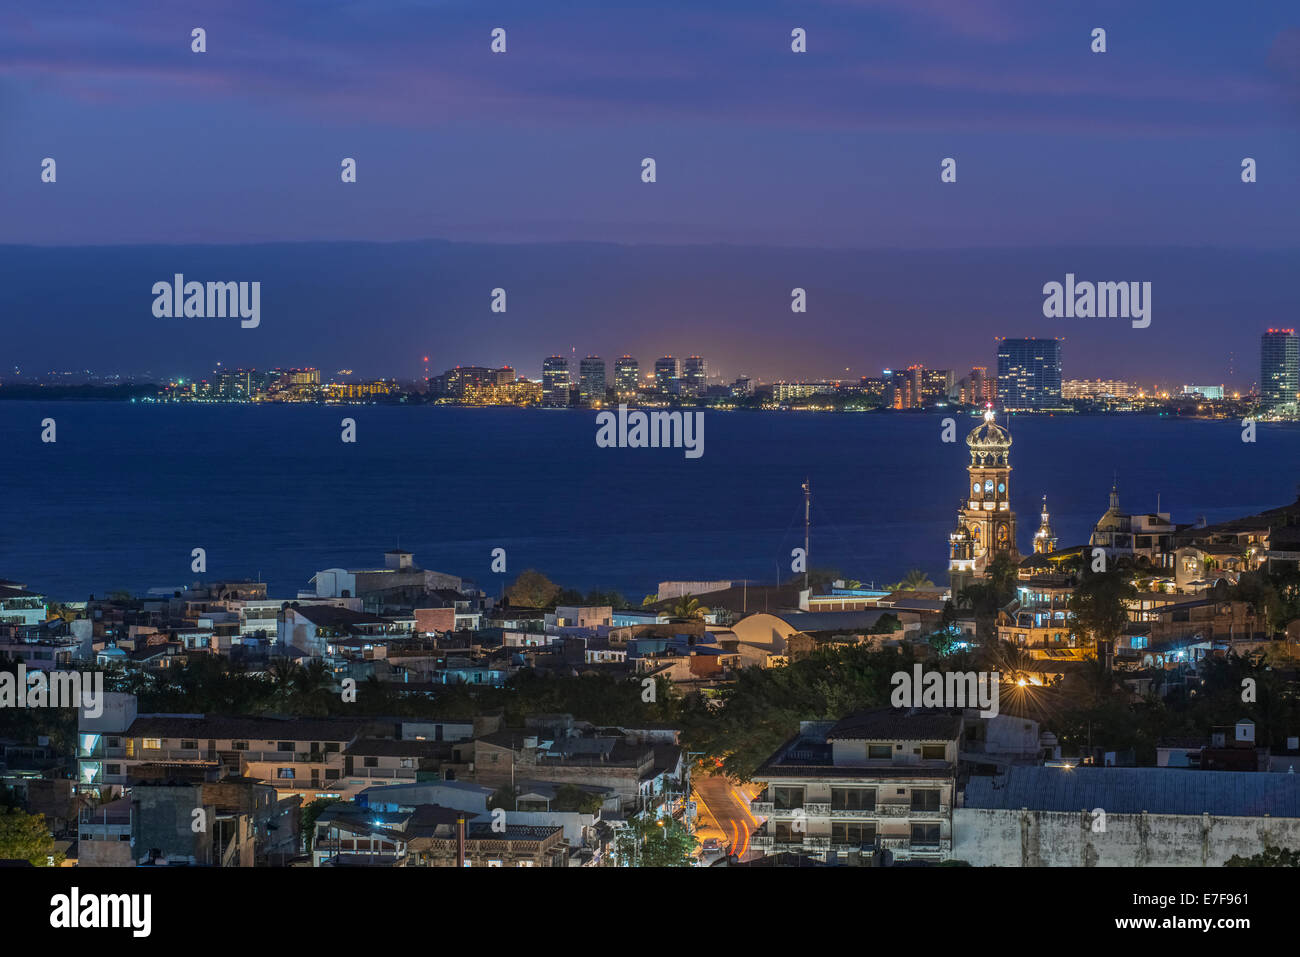 Aerial view of illuminated cityscape and skyline at dusk Stock Photo